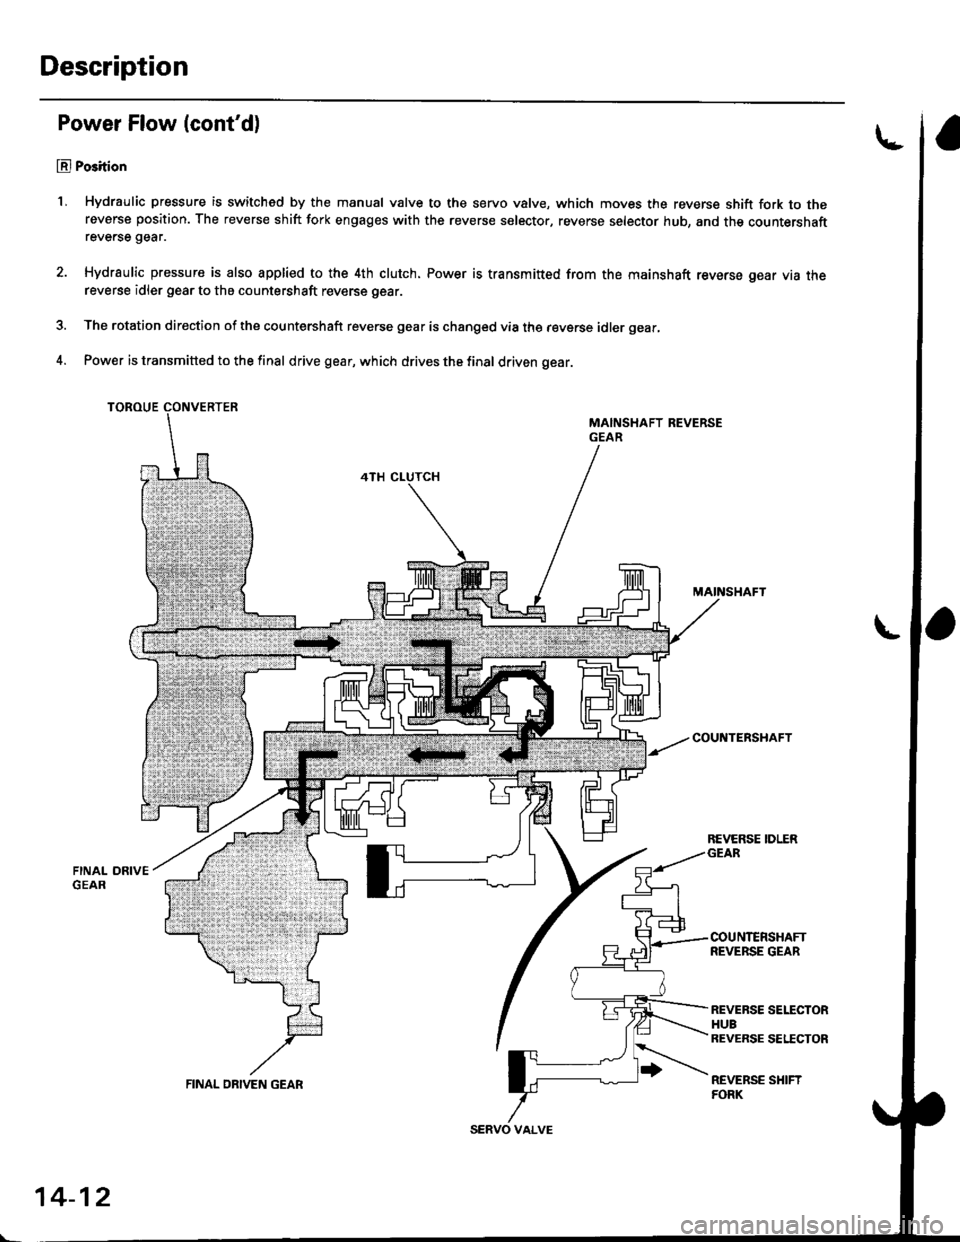 HONDA CIVIC 2000 6.G Workshop Manual Description
Power Flow (contd)
El Po3ition
1, Hydraulic pressure is switched by the manual valve to the servo valve, which moves the reverse shift fork to thereverse position. The reverse shift fork 